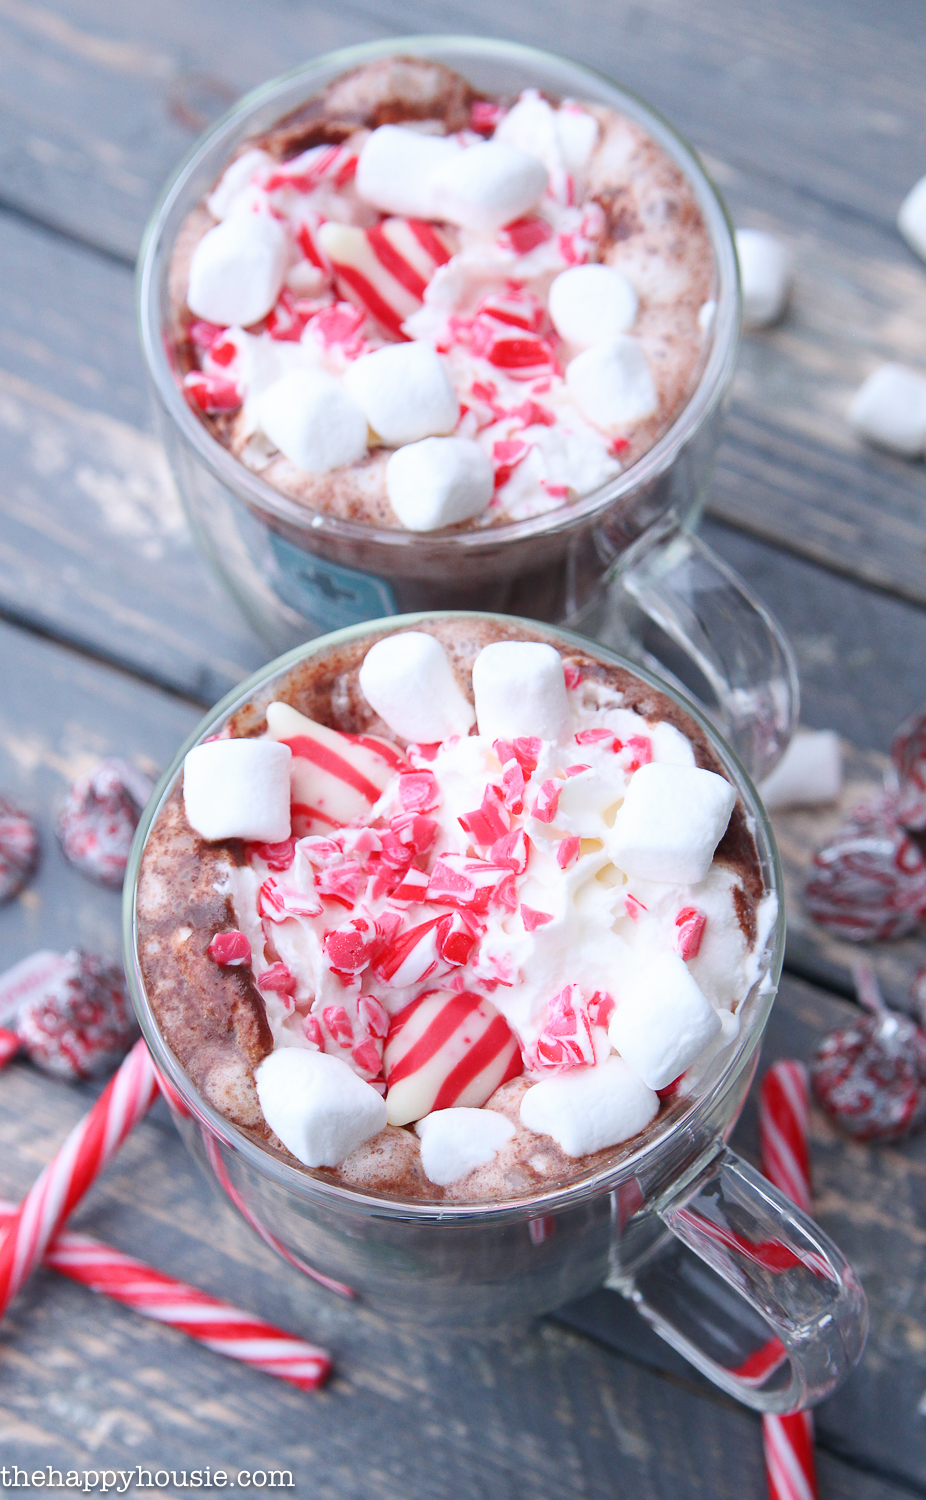 https://www.thehappyhousie.com/wp-content/uploads/2017/12/the-most-delicious-boozy-peppermint-kiss-hot-chocolate-recipe-3.jpg